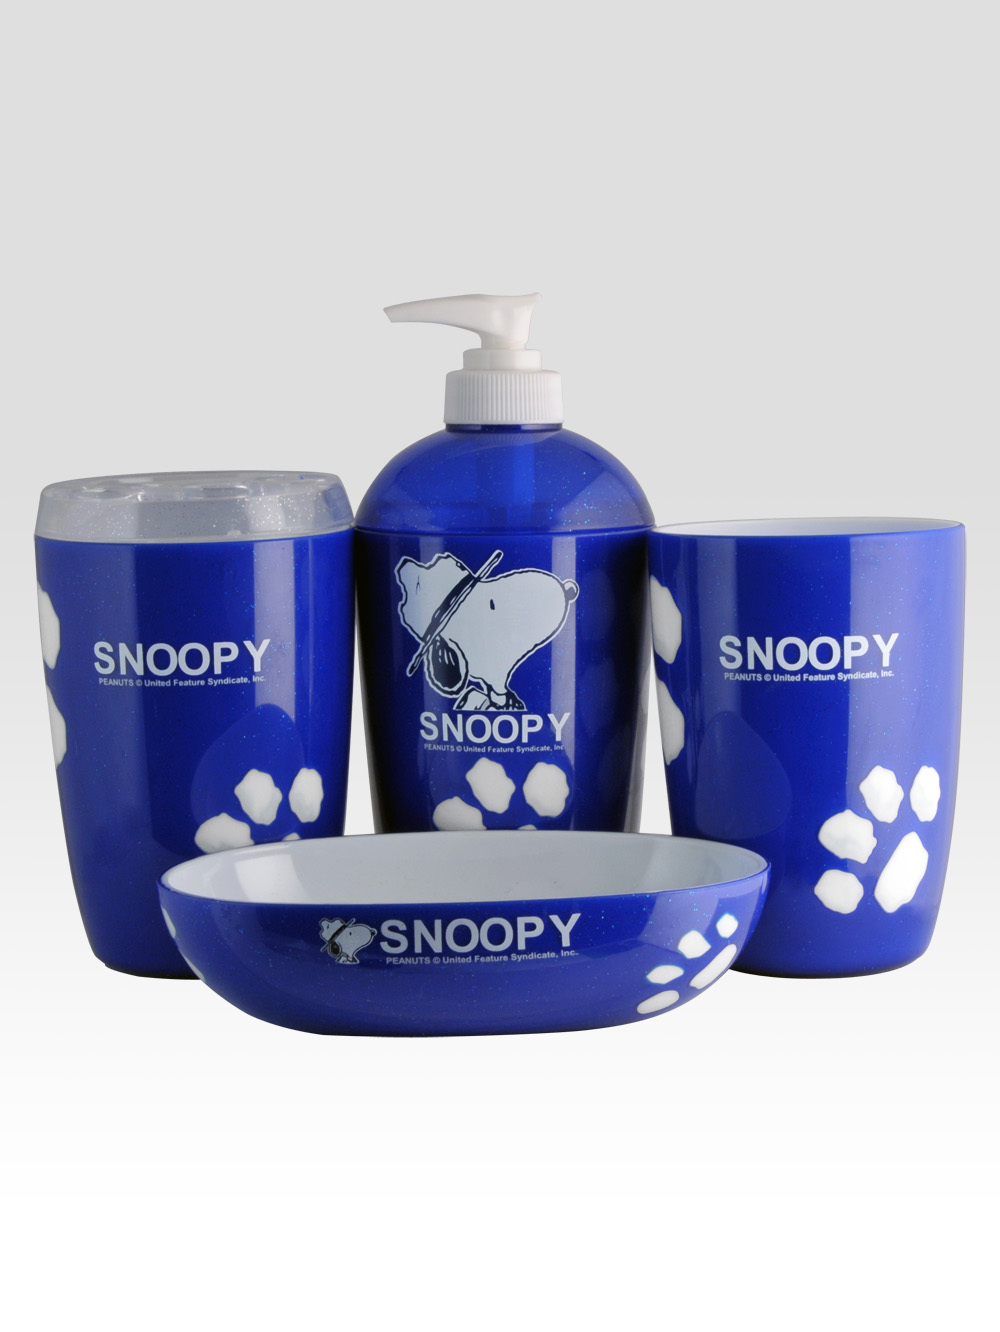 SP-C503 cute cartoon Snoopy bathing suit Group New Wedding Suit cup soap dish emulsion bottle toothbrush frame4